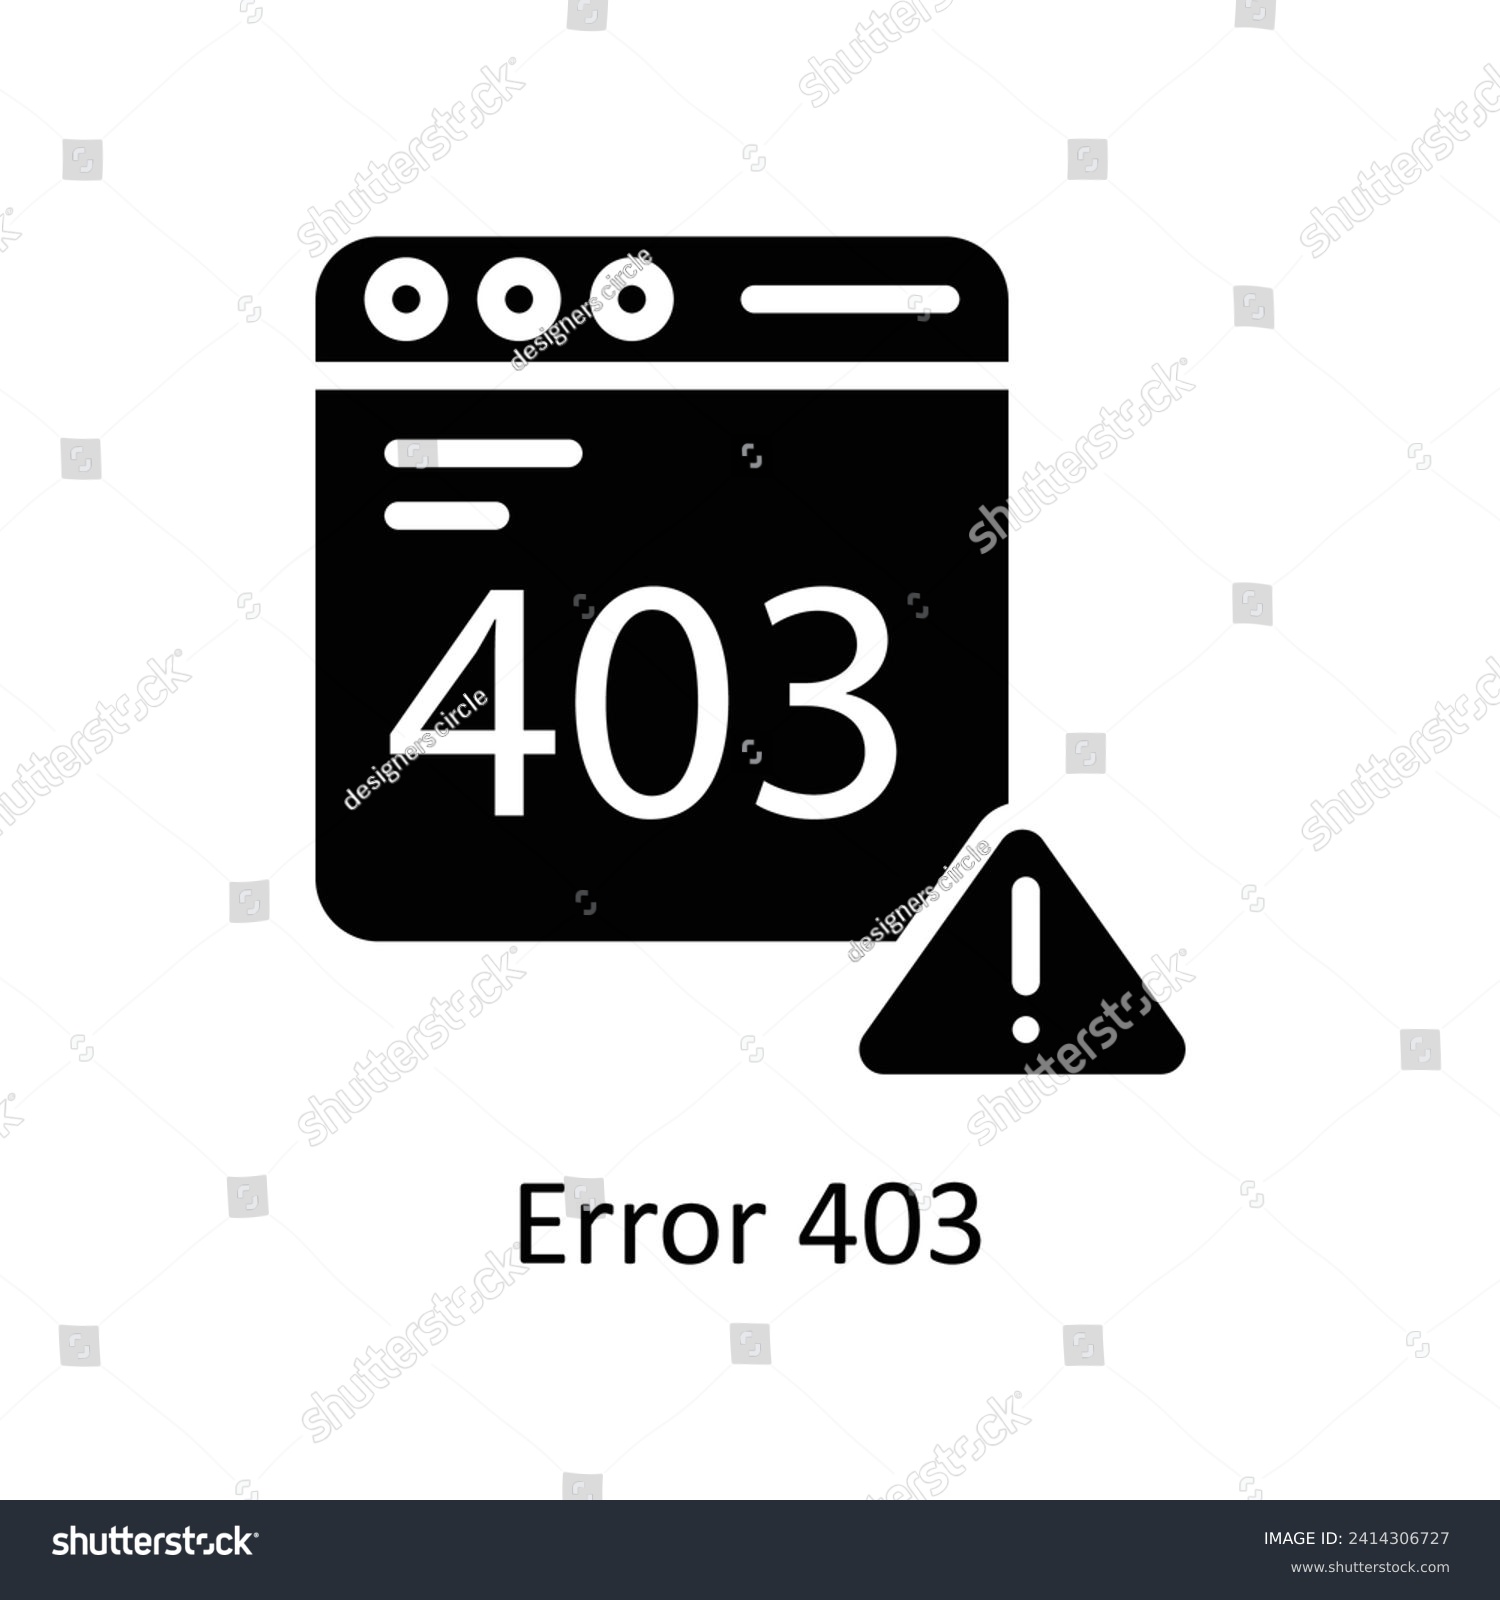 SVG of Error 403  Vector  Solid icon Style illustration. EPS 10 File svg